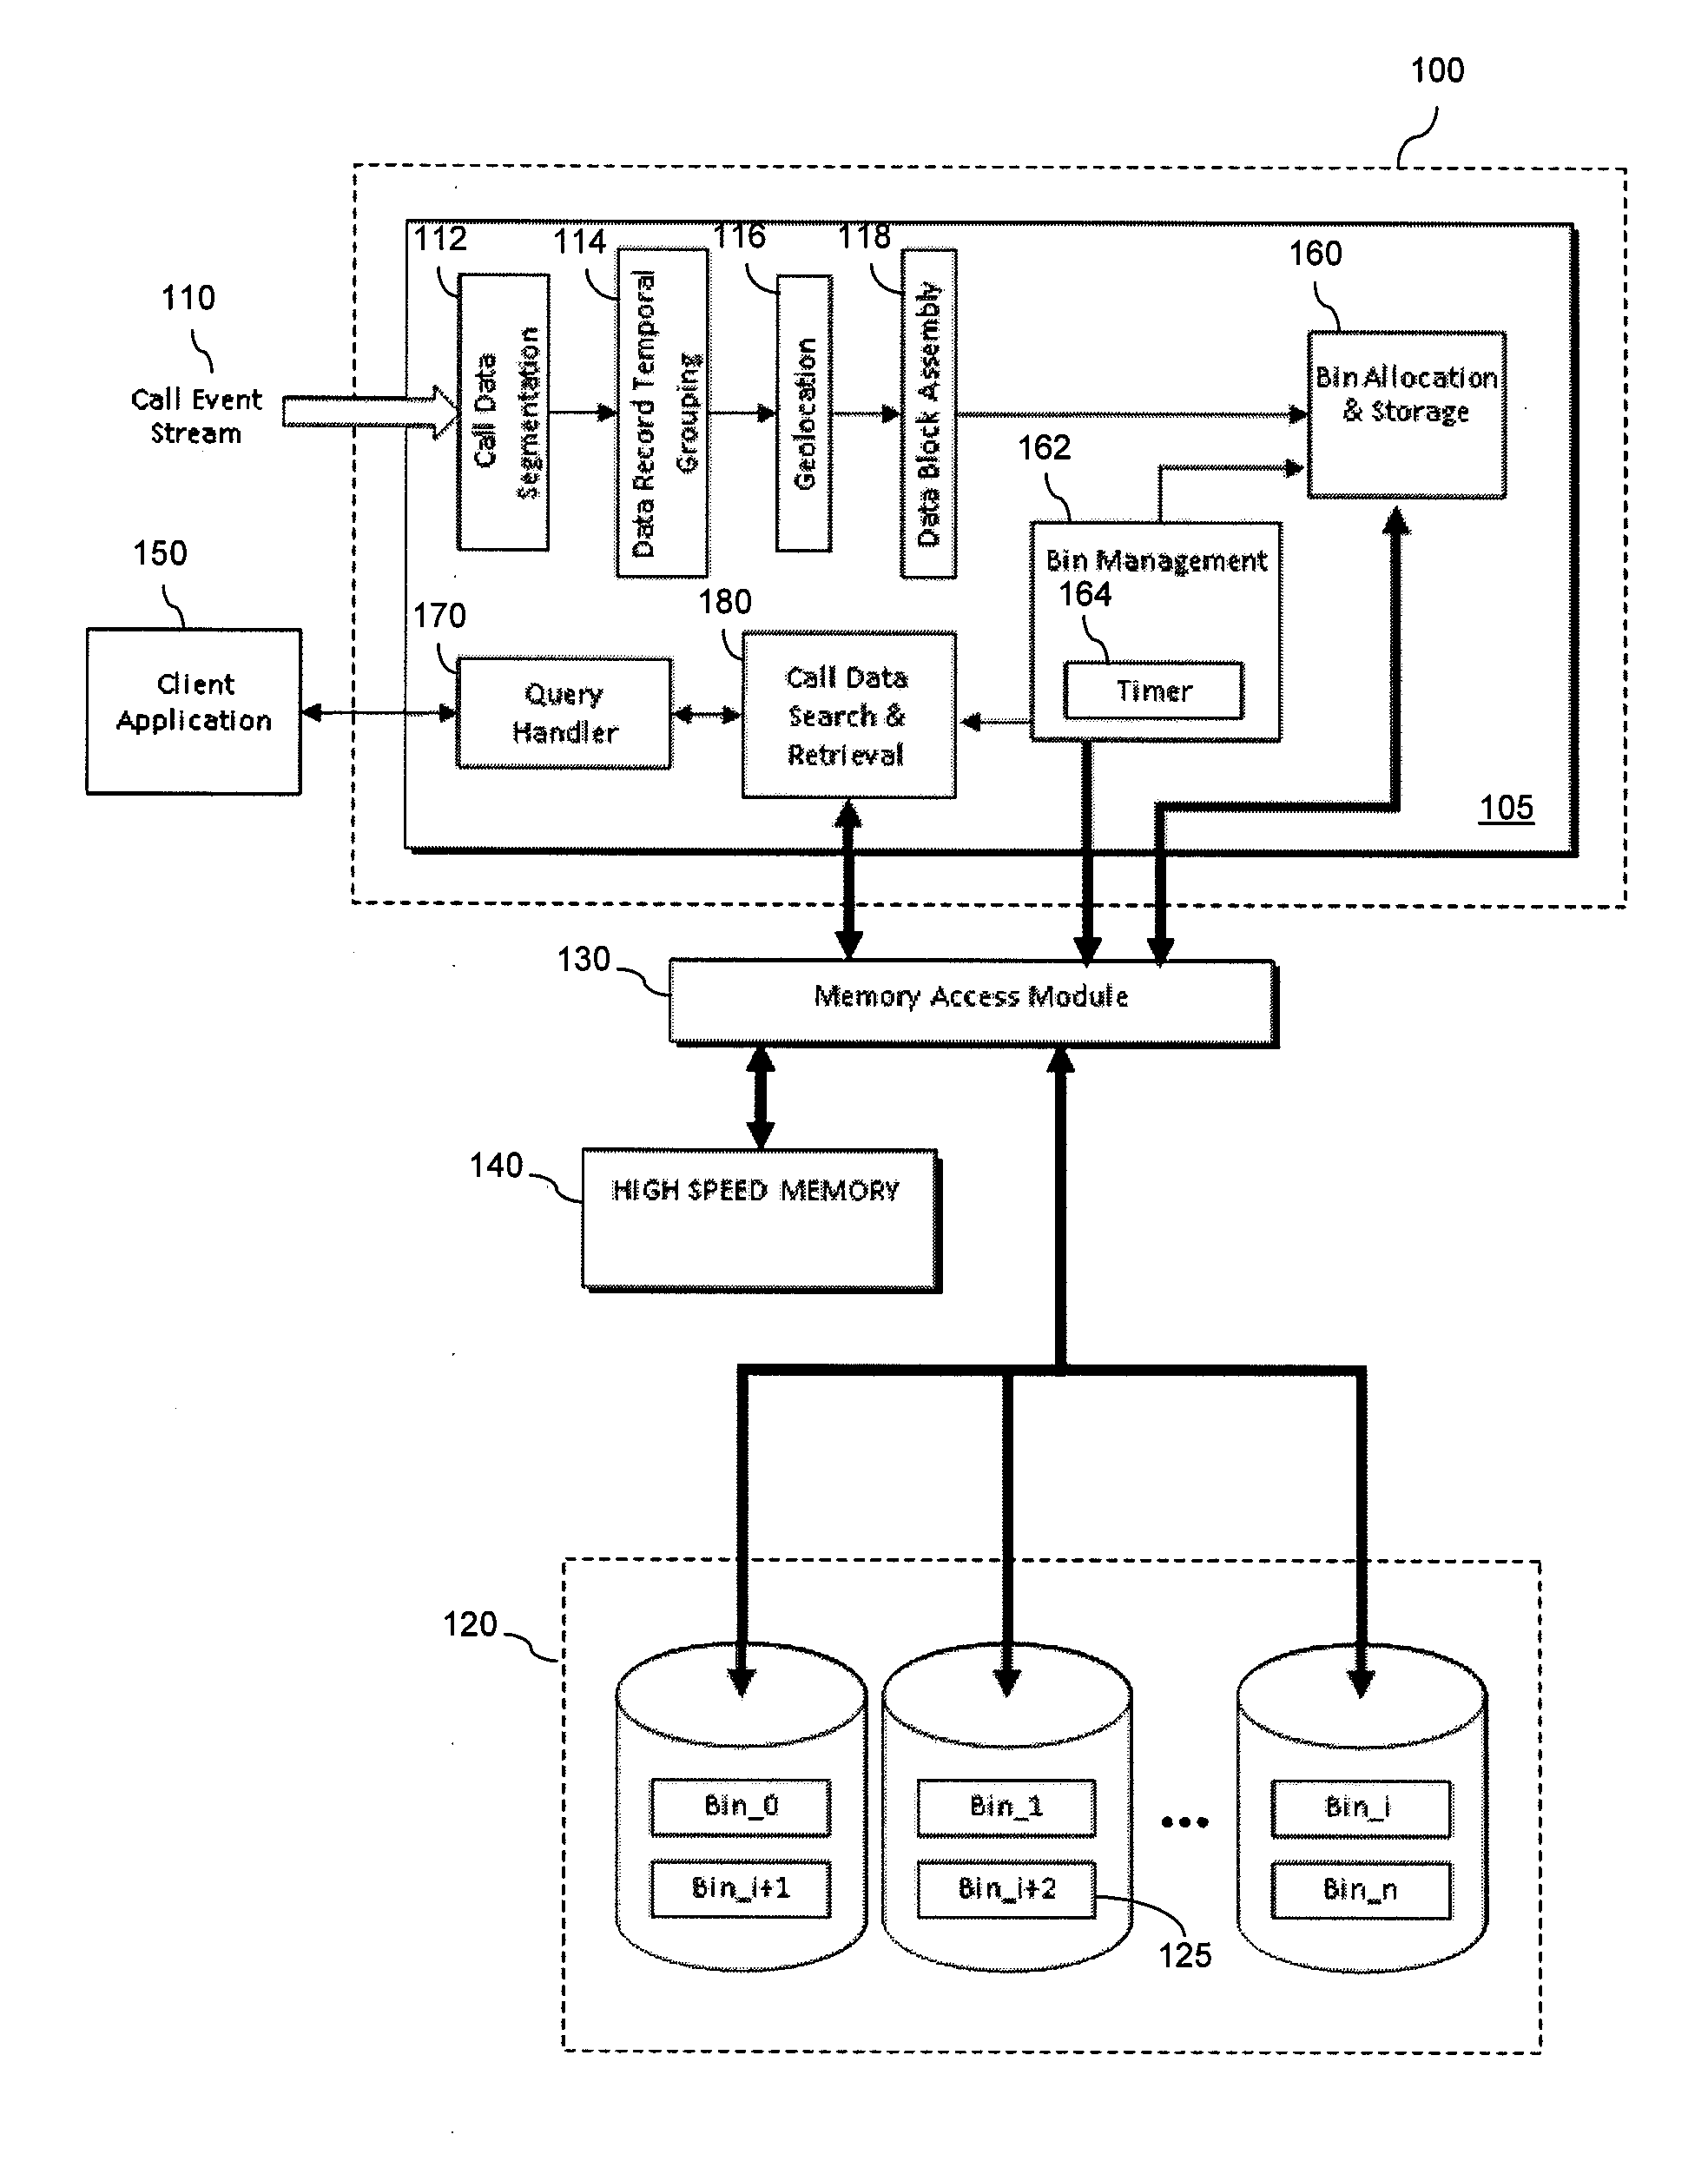 Method and apparatus for managing call data